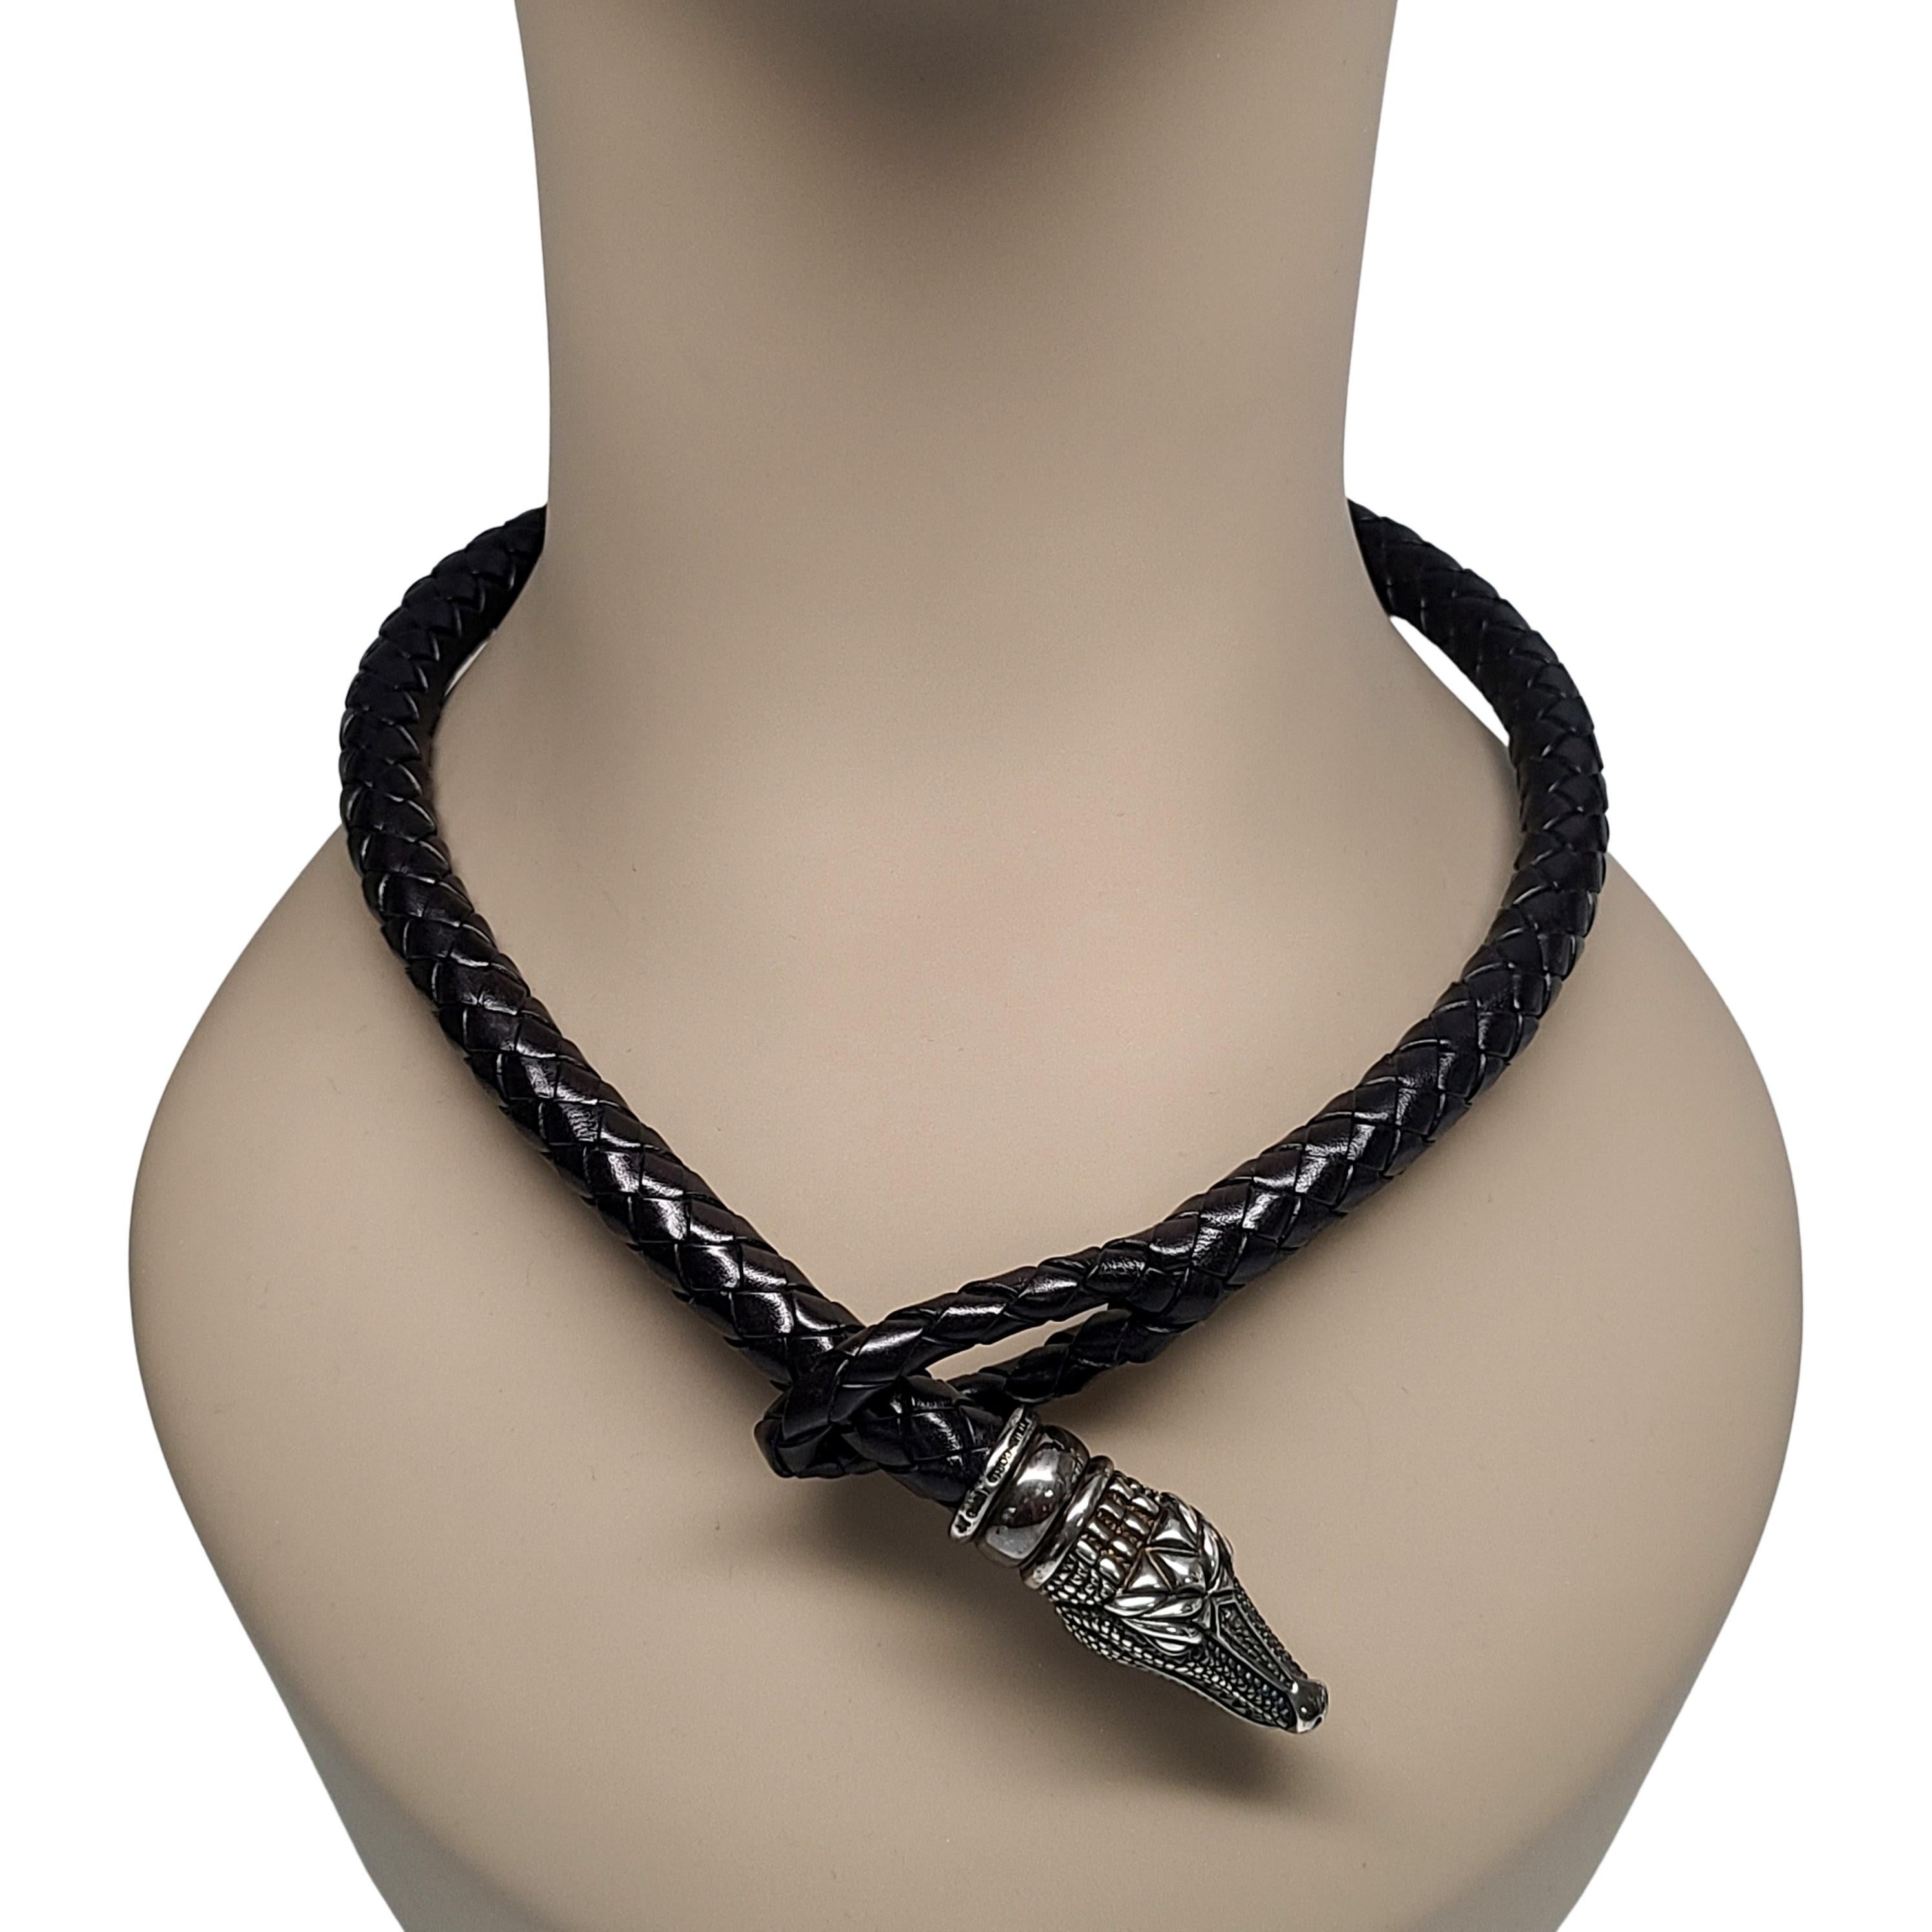 Kieselstein-Cord Sterling Alligator Head Braided Leather Choker Necklace w/Pouch For Sale 5